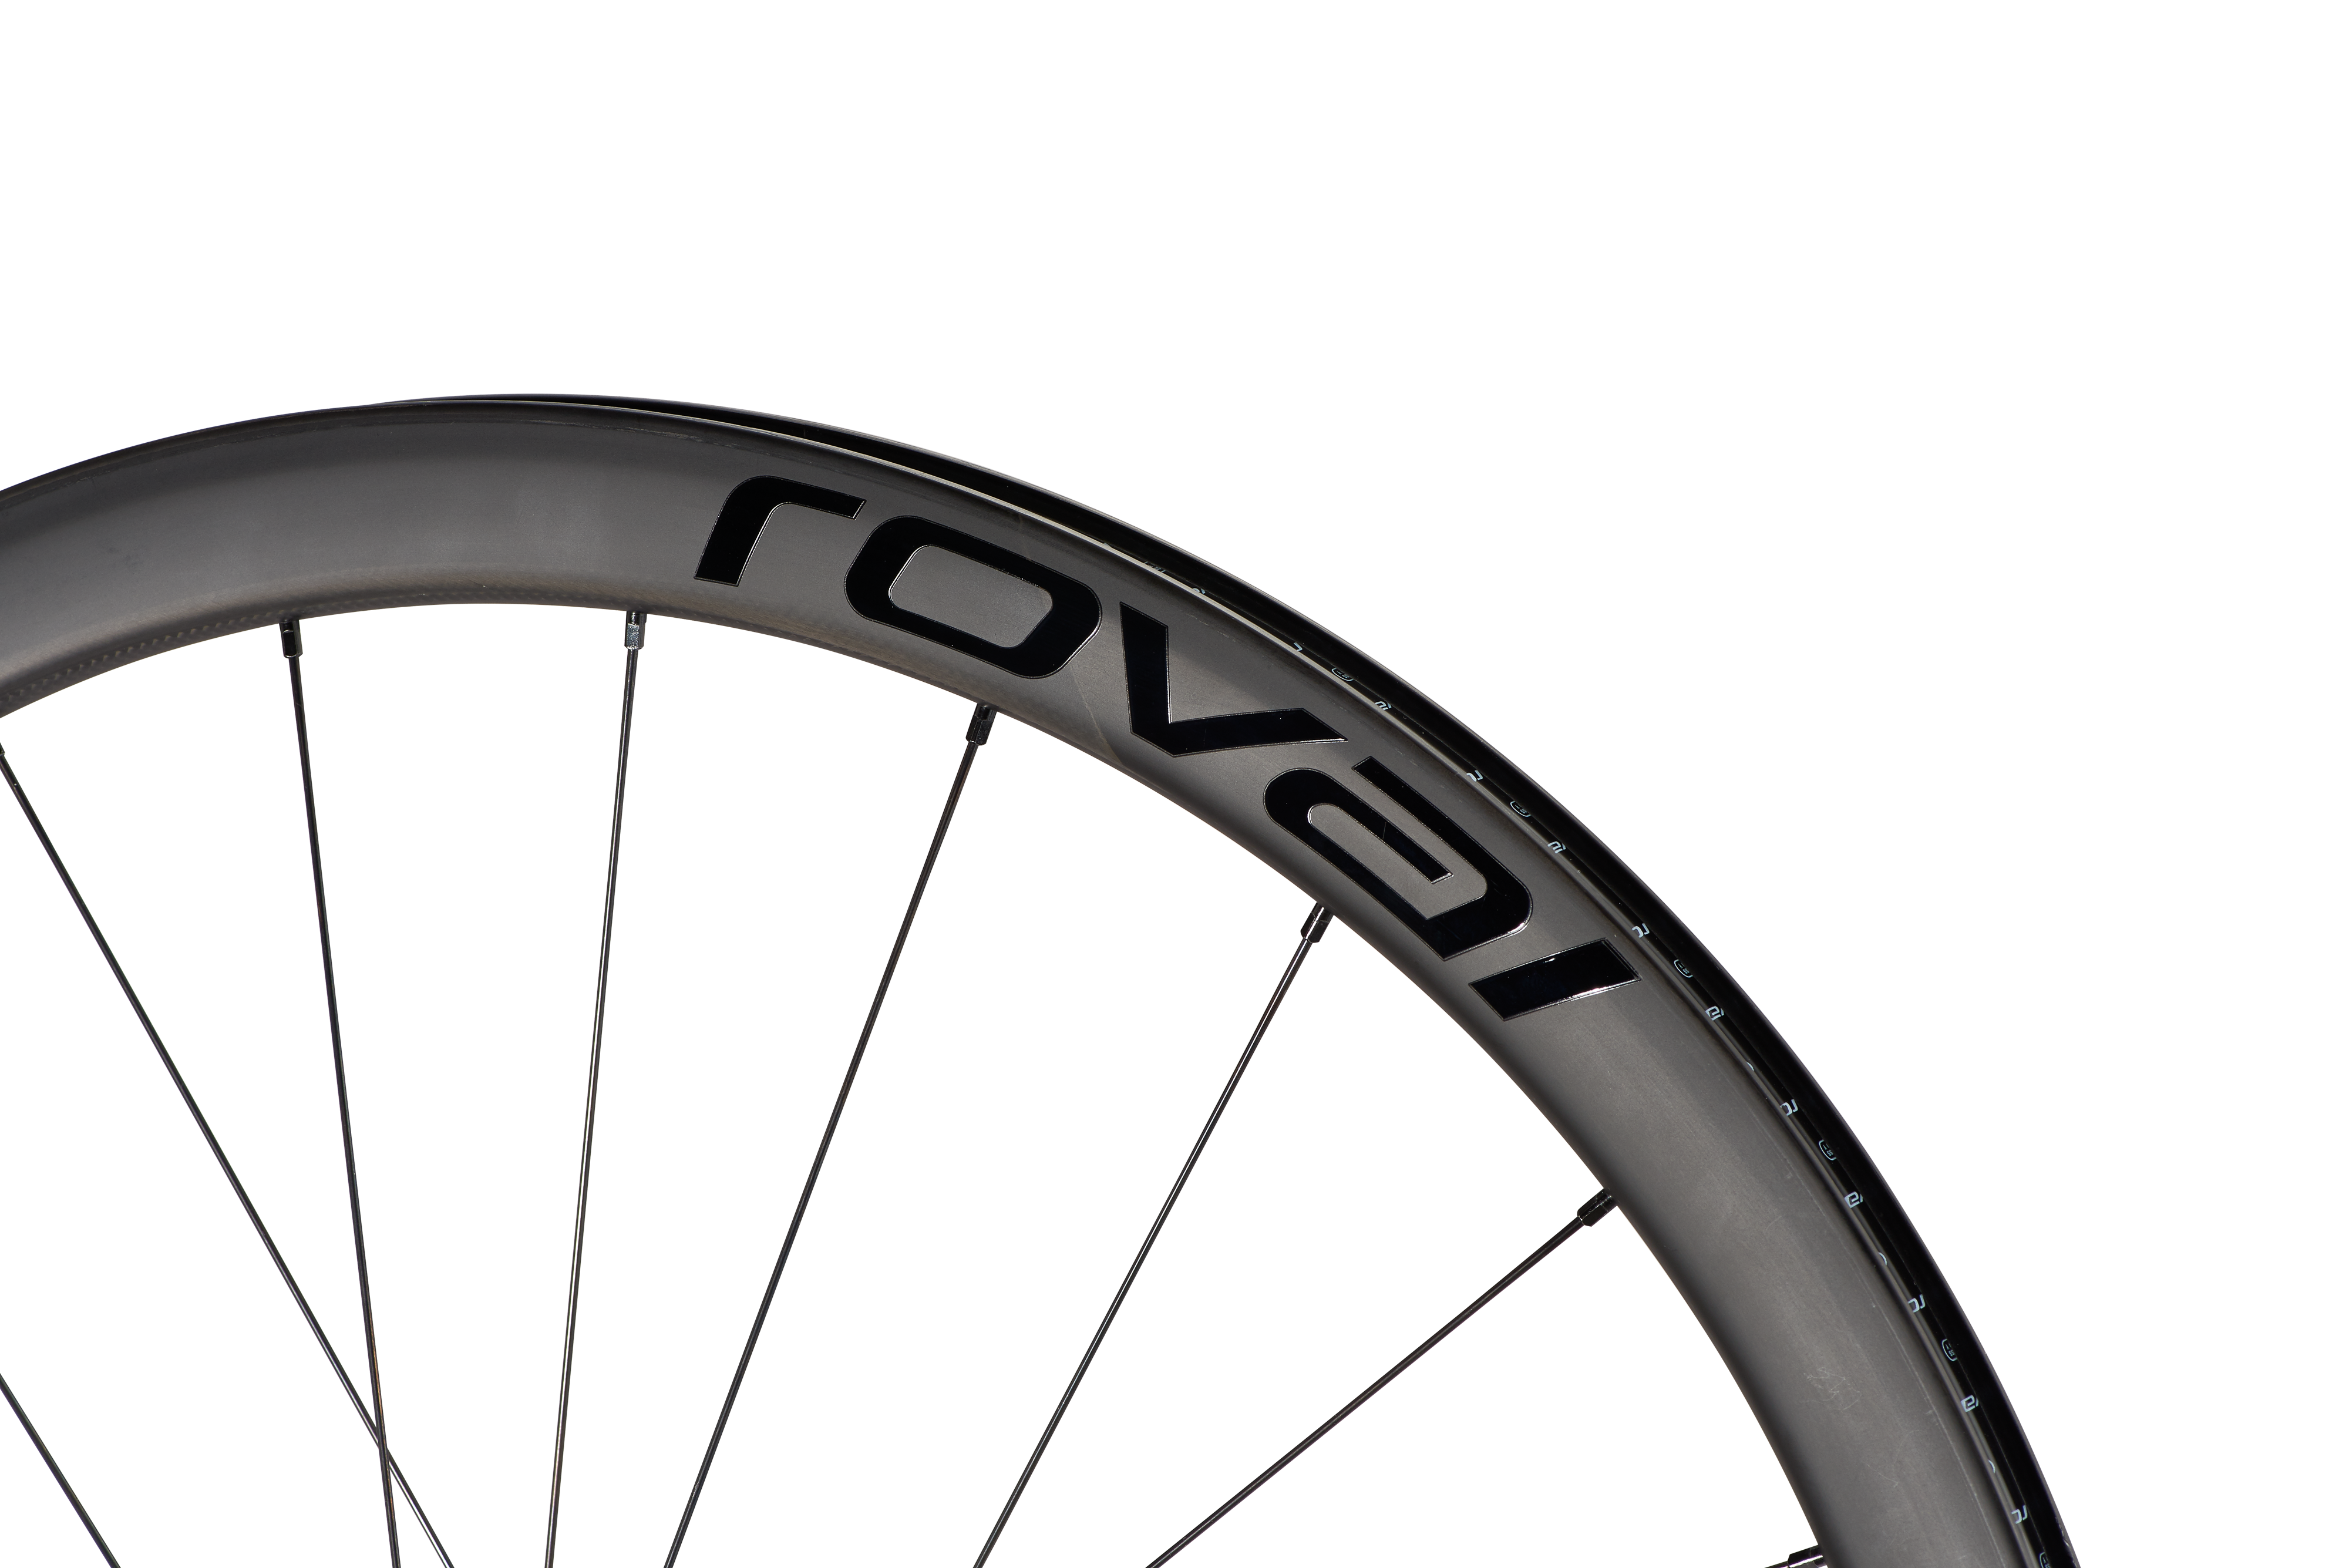 Specialized Roval C38 Disc Wheelset